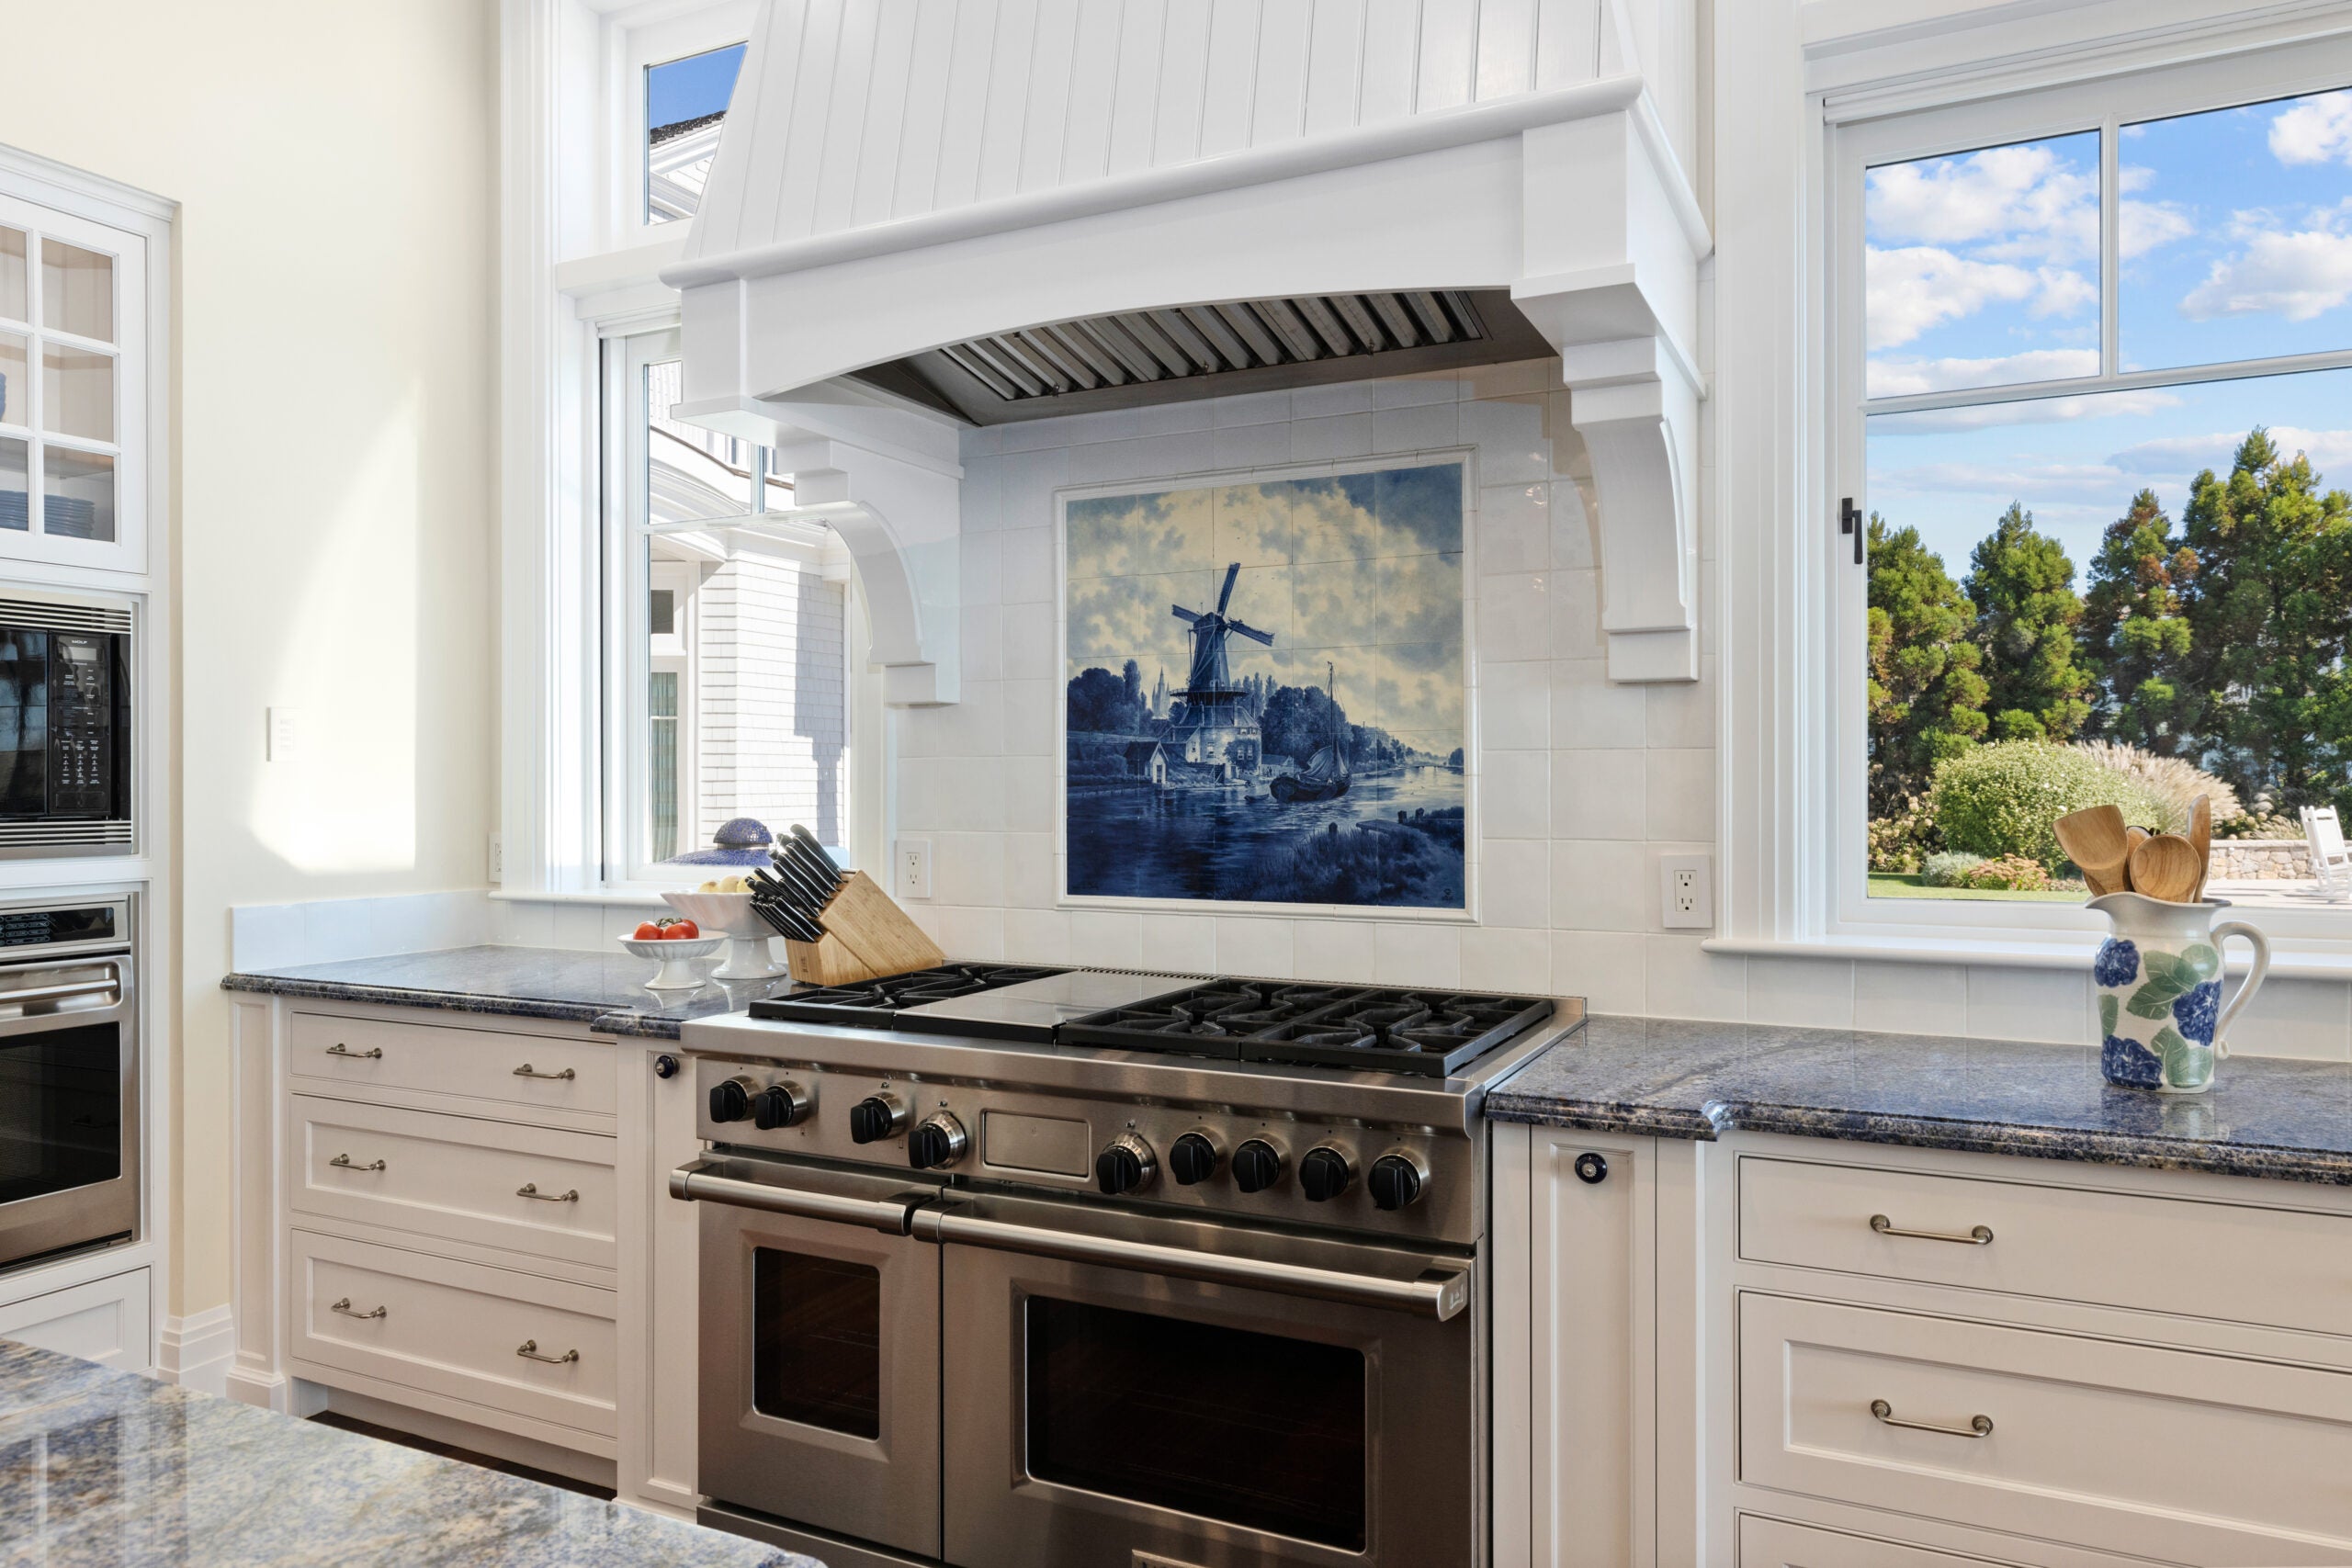 A detail shot of the kithen counter, which is blue and a double oven gas stove that is flanked by two 2-over-1 windows offering a view of the backyard. It is a sunny day with a few clouds, and the yard has mature trees whose low height is common along the coastline. The bushes are a mixture of grasses. The backsplash behind the stove is a white tile with a blue inlay of a windmill scene. There is at least one other oven off to the left, and the cabinetry that flanks the stove is composed of drawers. The stove hood is wood painted white.